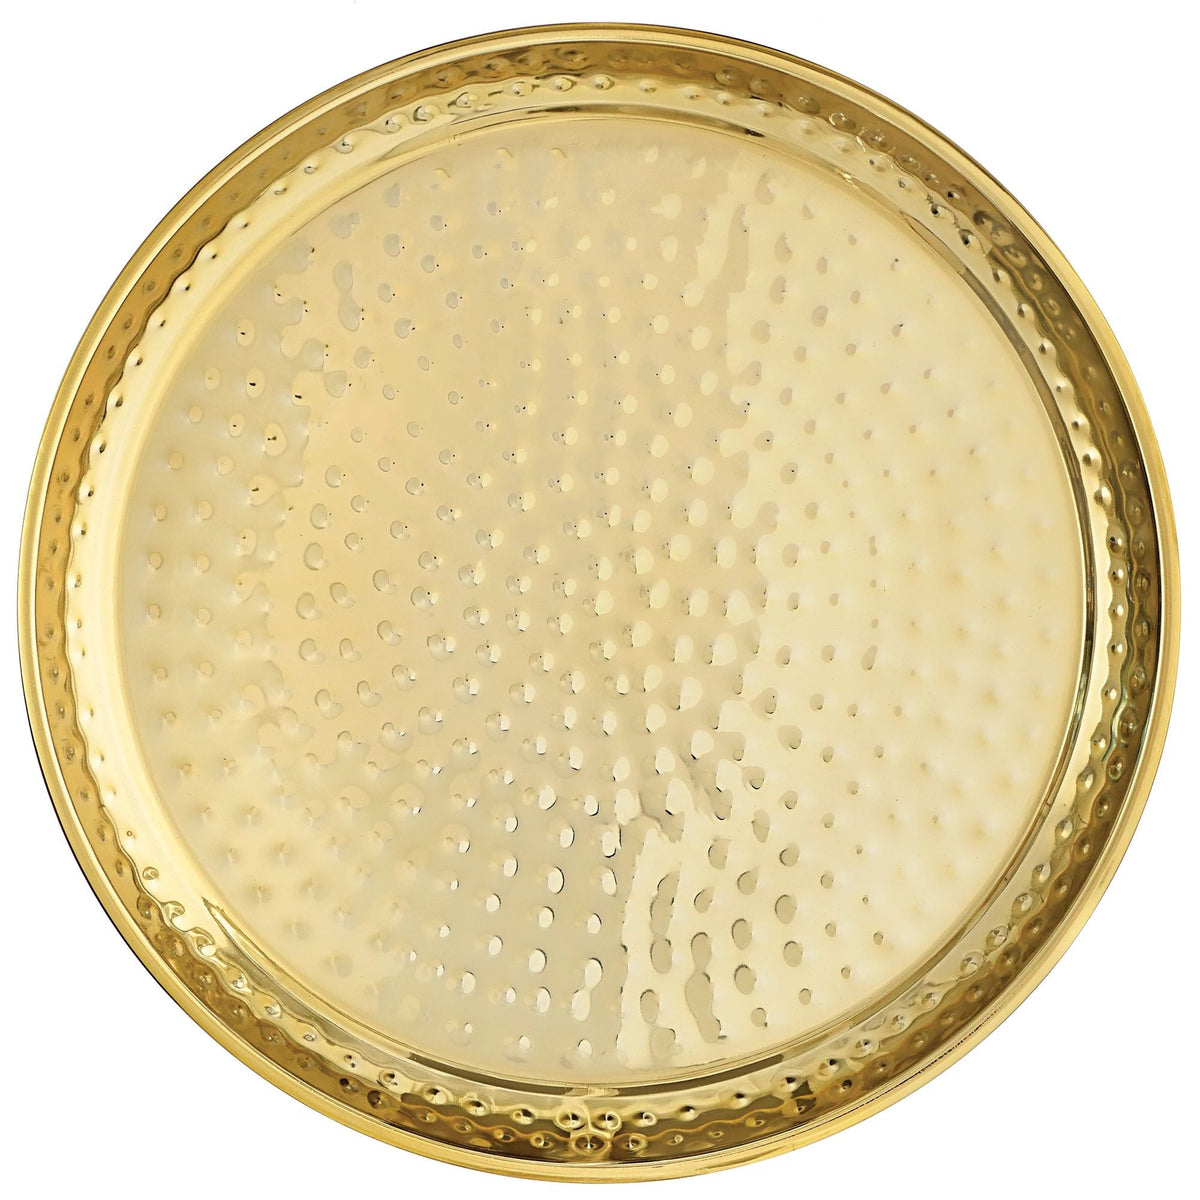 AMSCAN CA Disposable-Plasticware Gold Stainless Steel Hammered Tray, 16 Inches, 1 Count 192937439449